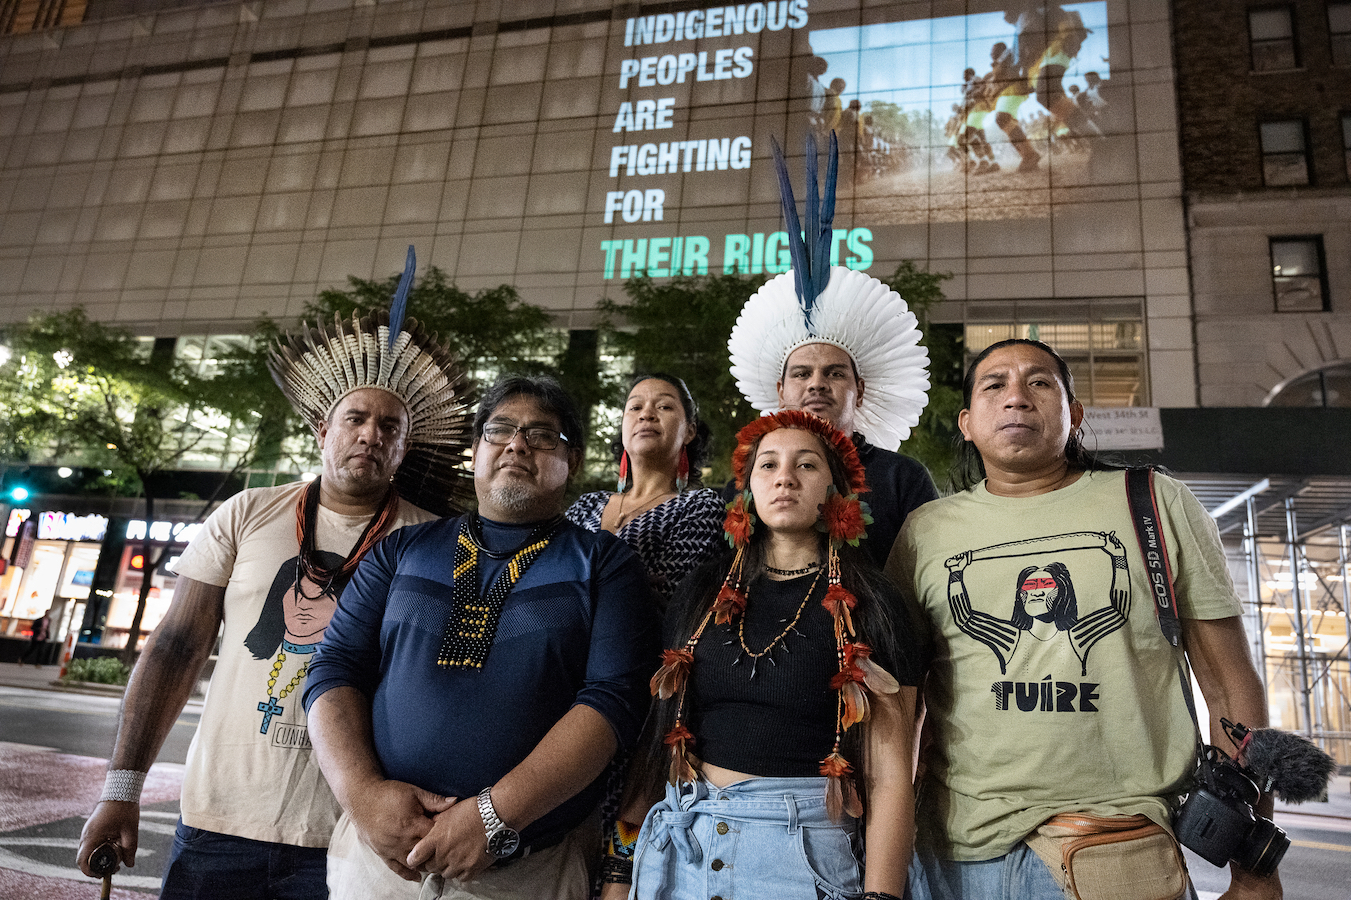 six Indigenous people stand in front of a projected message on a building that reads 